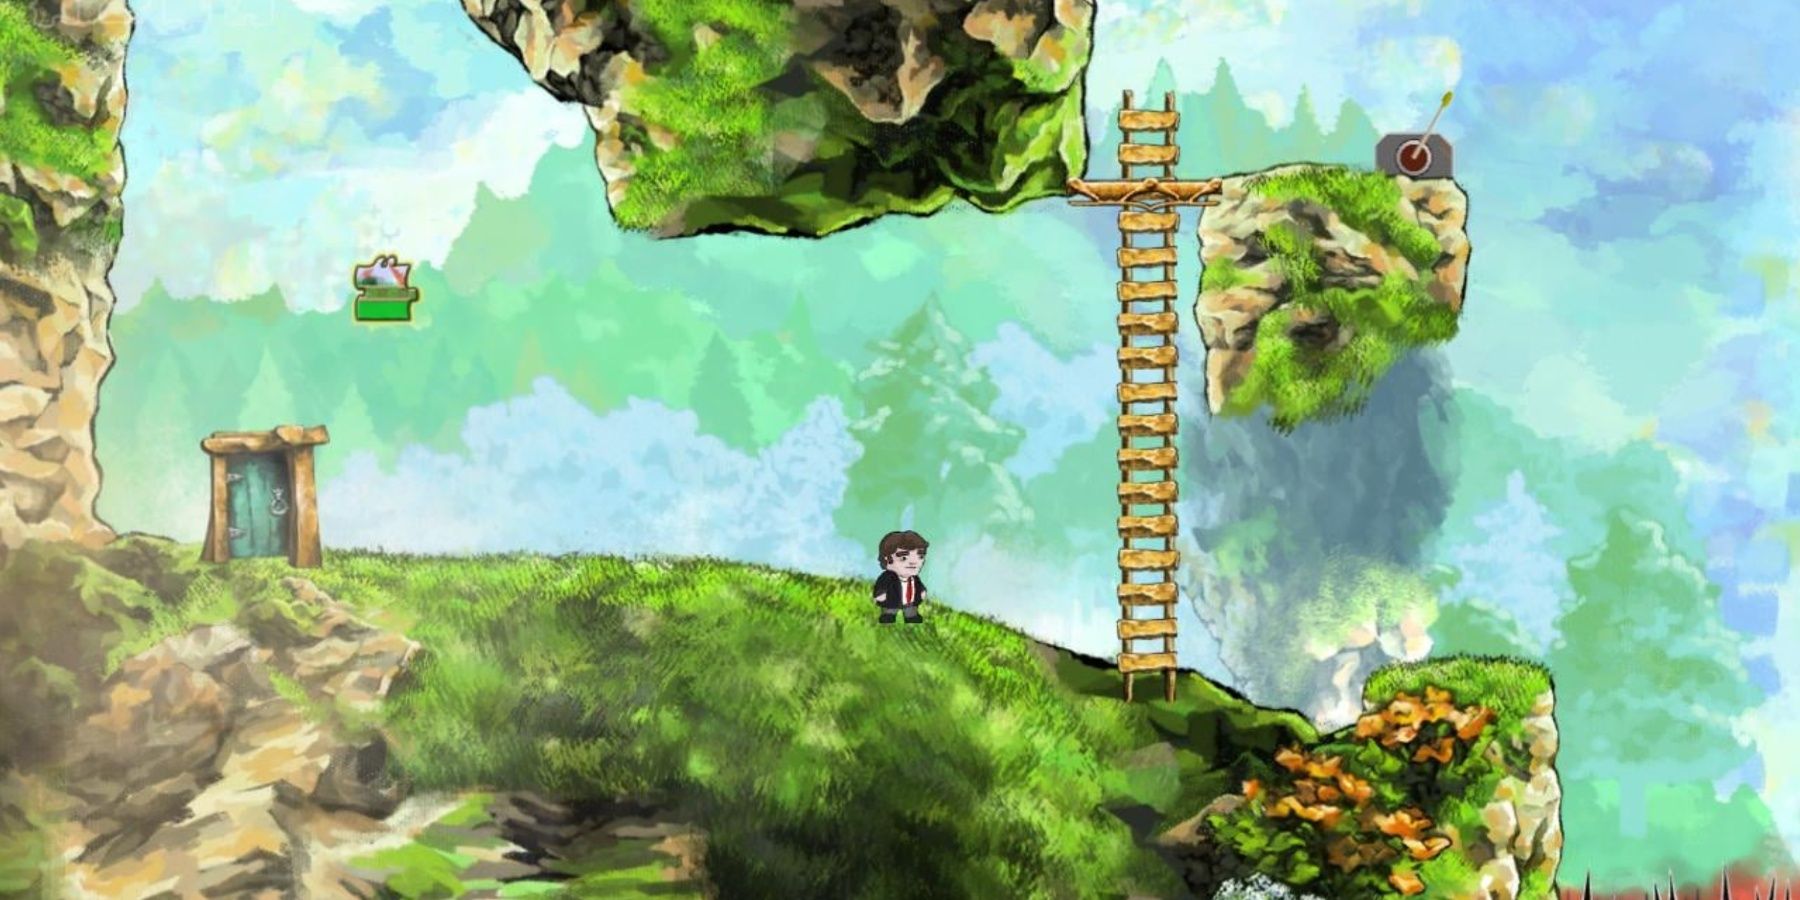 A pixel character standing next to a ladder on grass